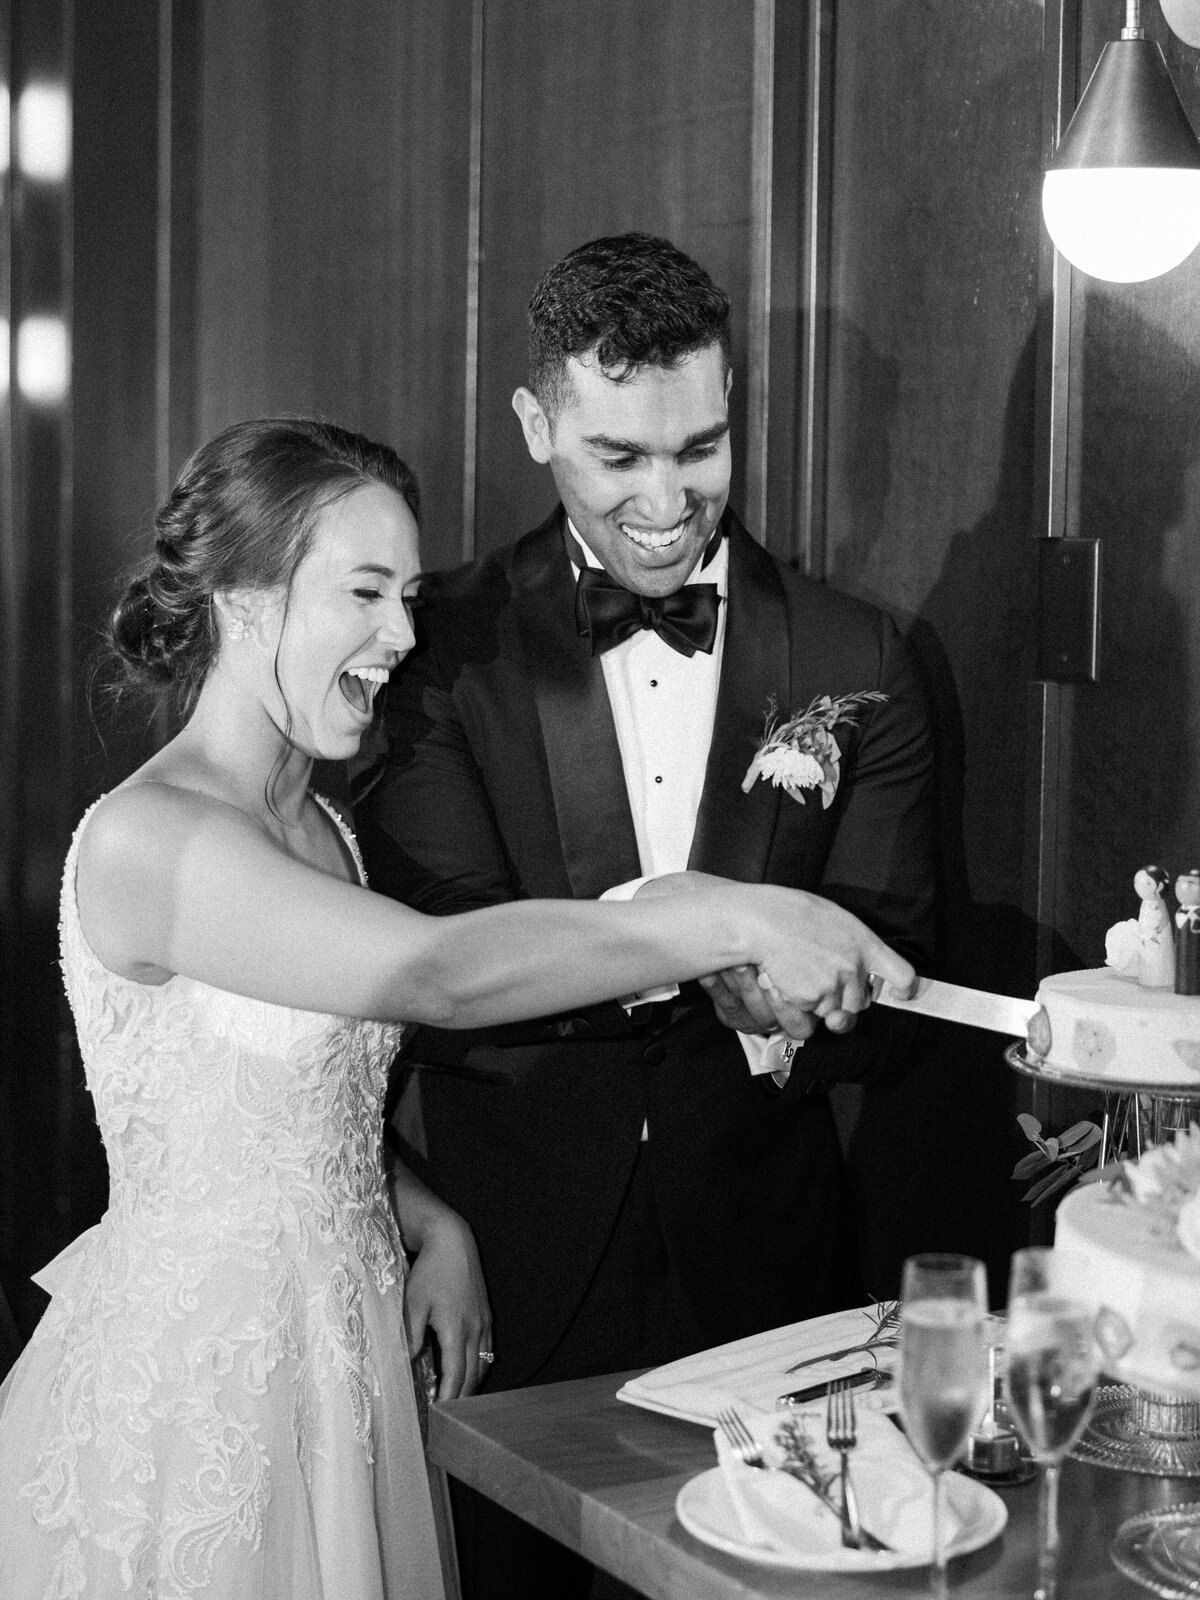 A bride and groom smile ear to ear as they cut their wedding cake together during their wedding reception